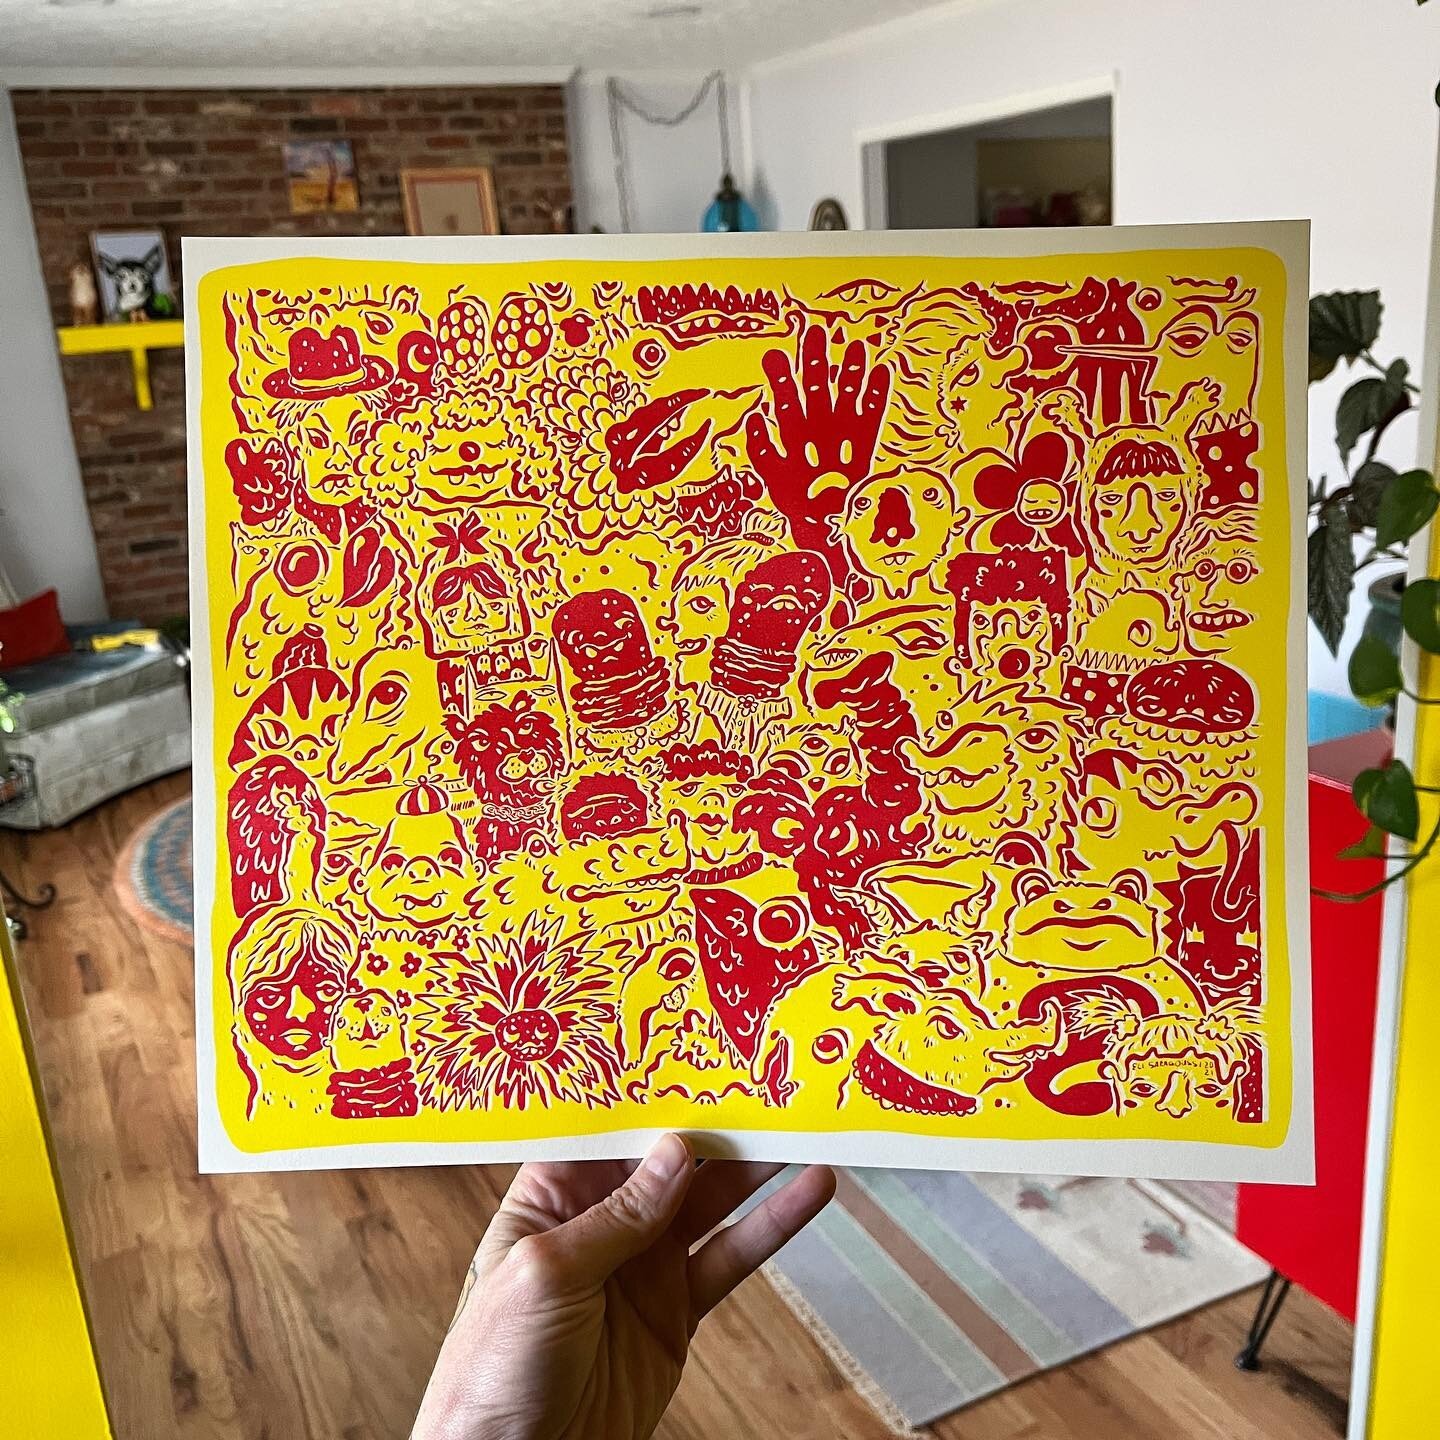 🎂New ketchup &amp; mustard print available up on my website! all the bozos hangin🍭
&ldquo;Crowd 1&rdquo; is a 11 x 13 risograph on thick cover stock and a limited edition of 25 🌭